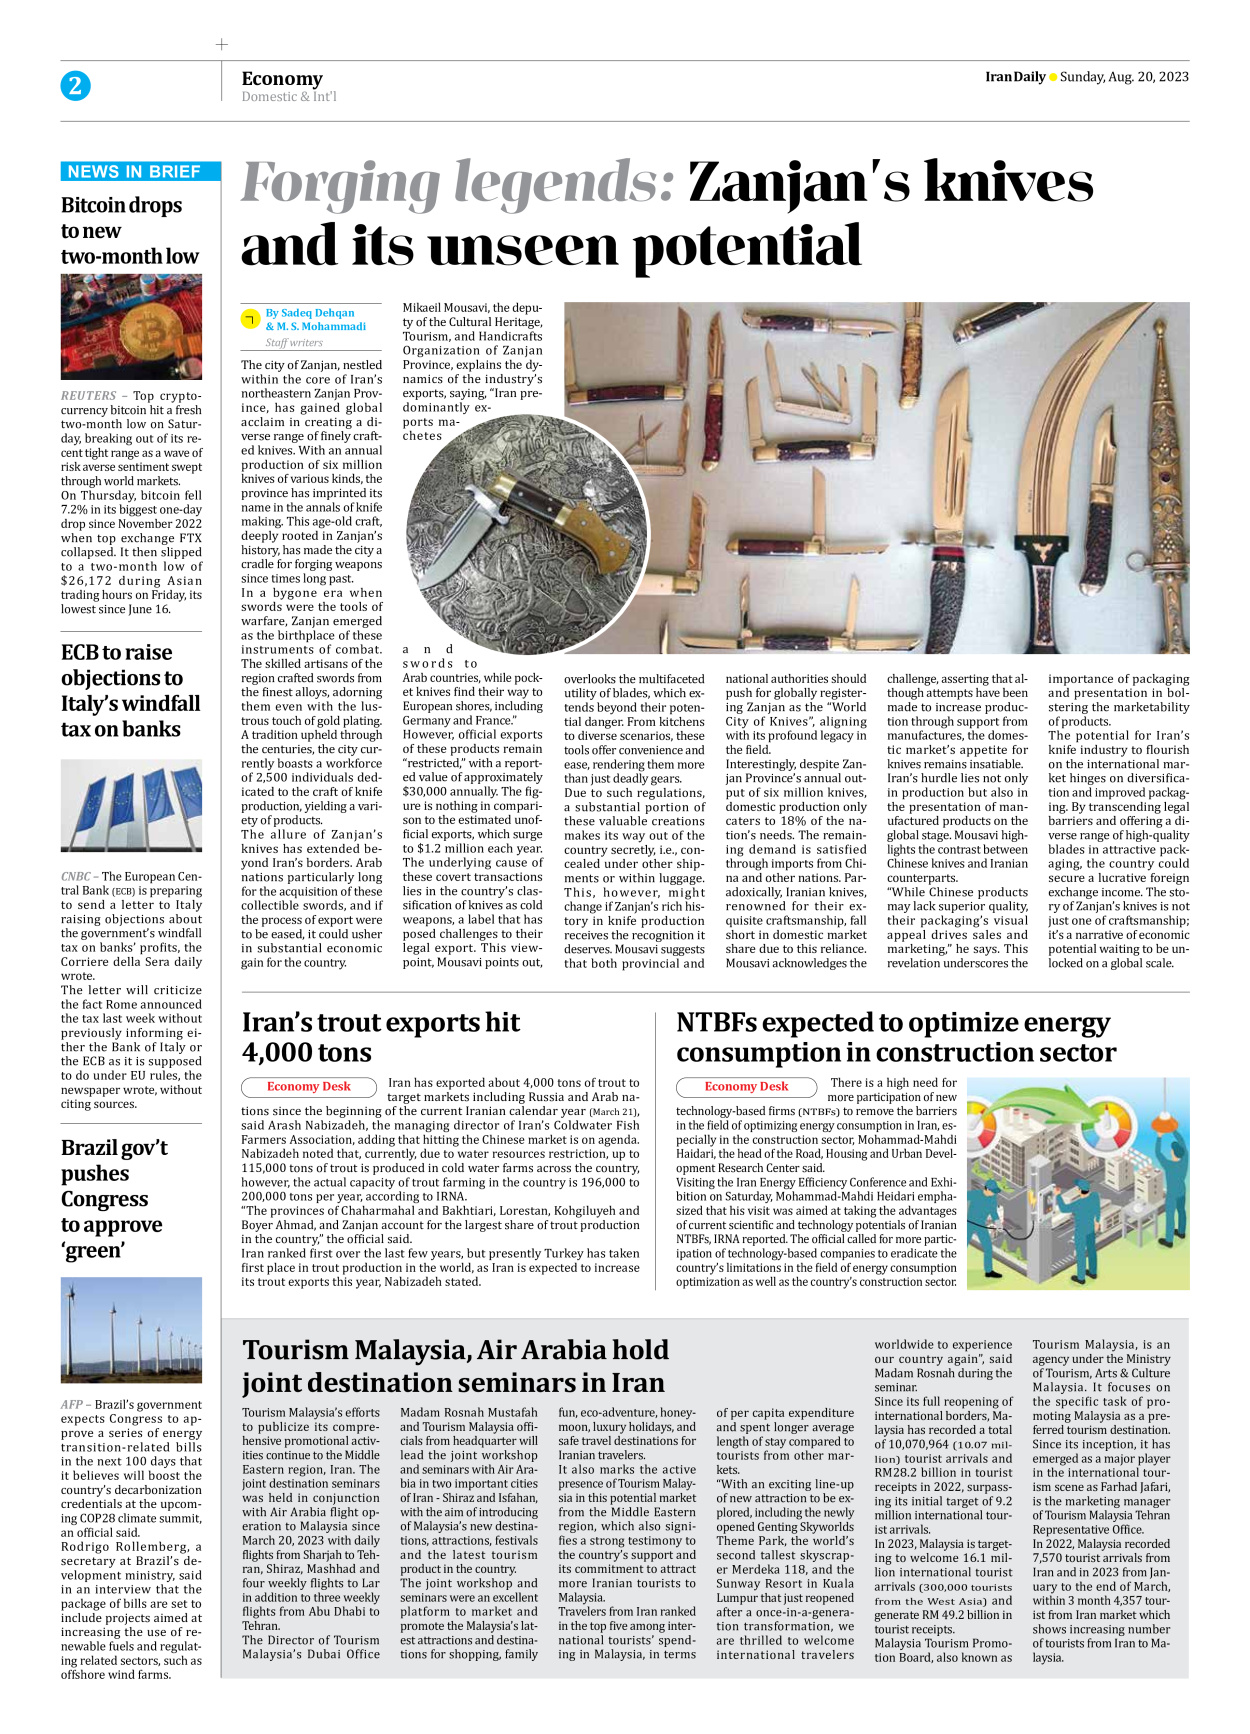 Iran Daily - Number Seven Thousand Three Hundred and Sixty Seven - 20 August 2023 - Page 2